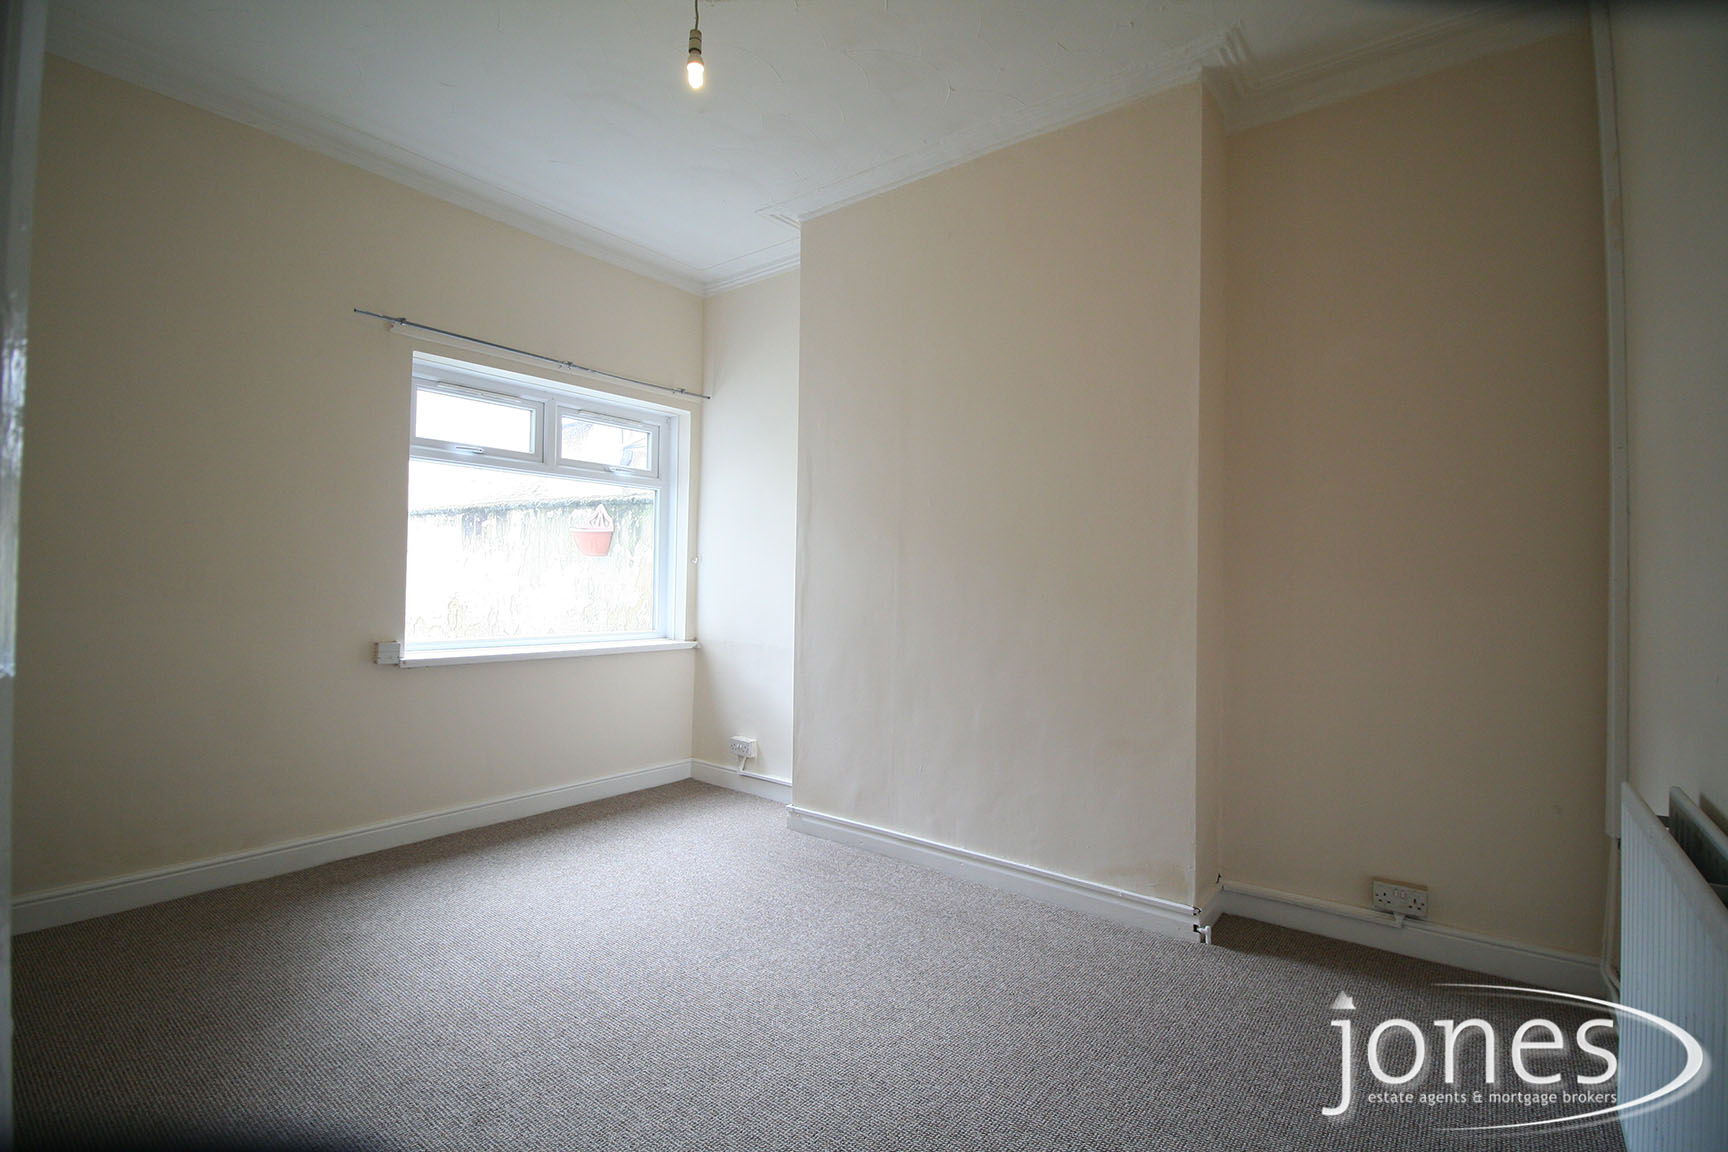 Home for Sale Let - Photo 03 Victoria Road, Thornaby, TS17 6HH